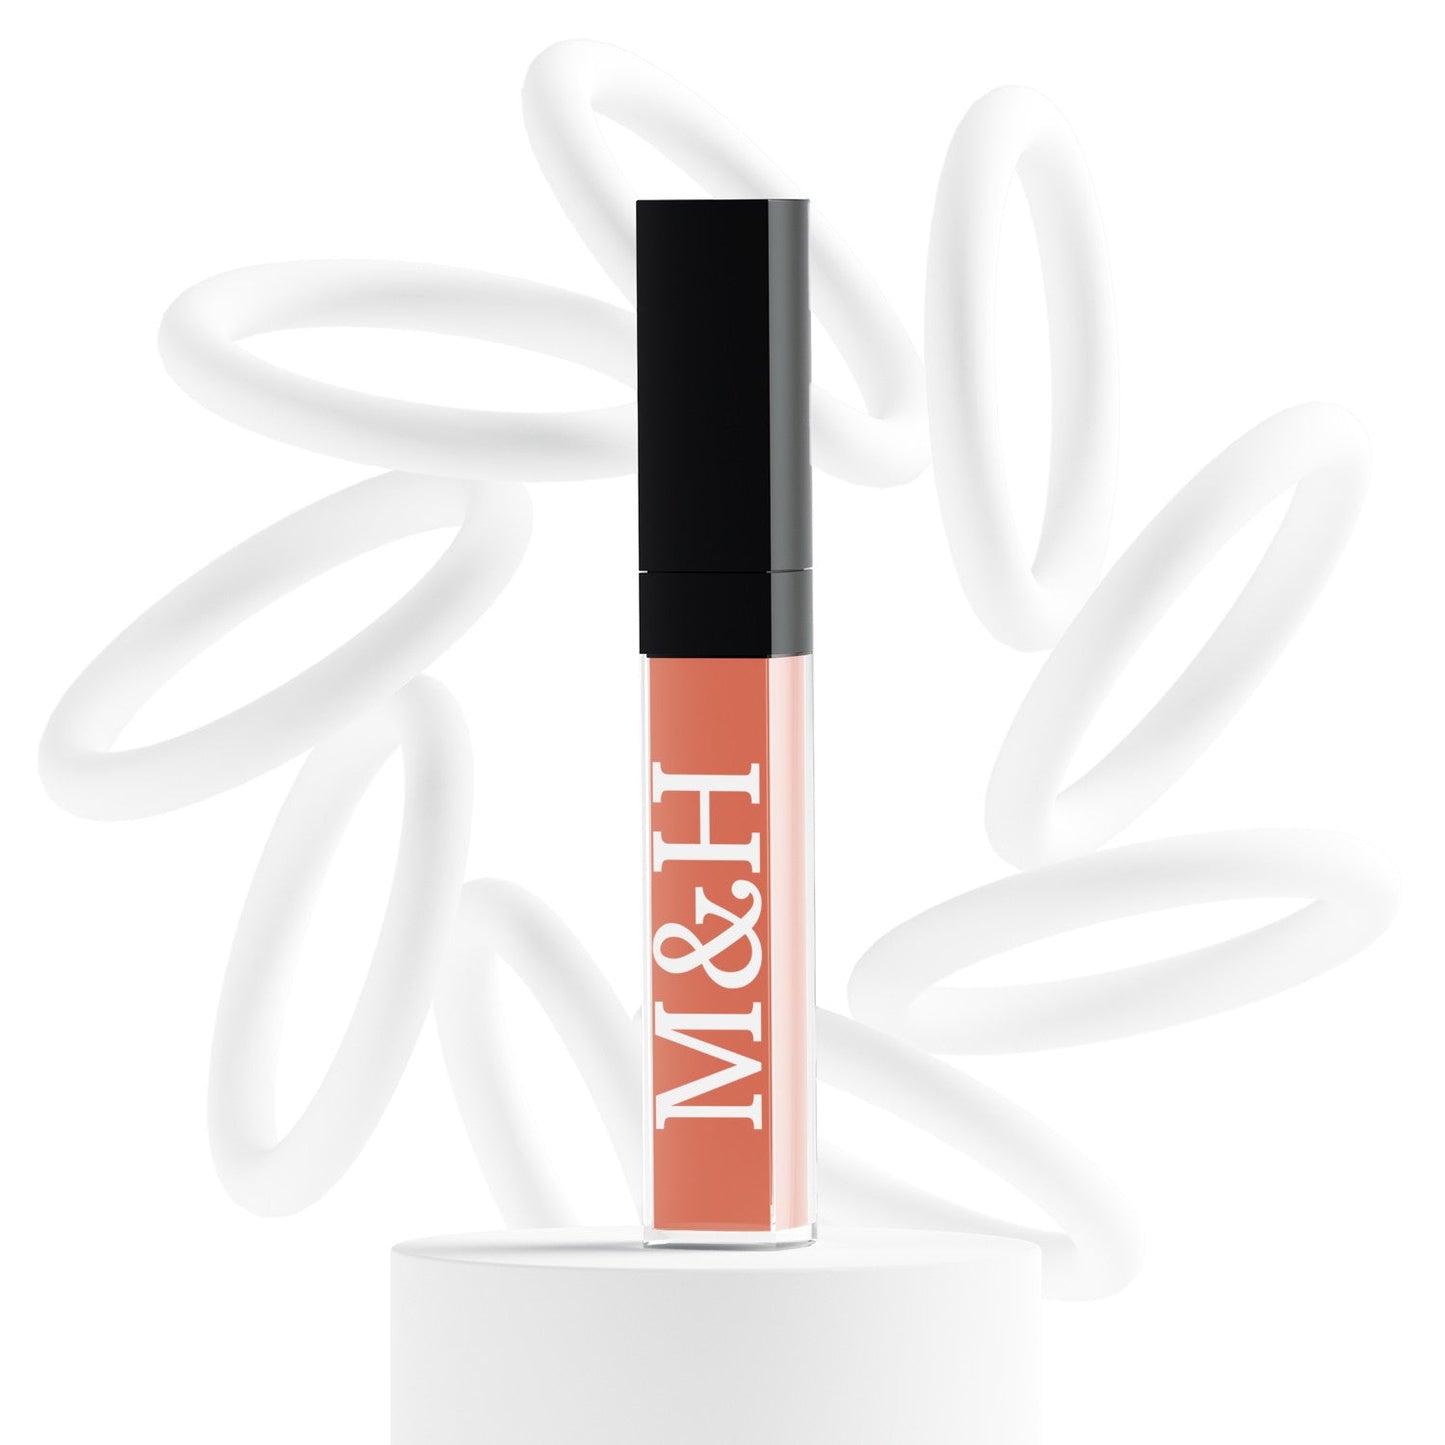 Vegan Concealers - M&H FashionVegan ConcealersconcealerM&H FashionM&H FashionConcealer-943Perfect Orange CorrectorVegan ConcealersM&H FashionconcealerM&H Fashion This multifunctional concealer is designed to cover under-eye circles, complexion alterations, and major imperfections like scars, hyperpigmentation, burns, and tatVegan Concealers